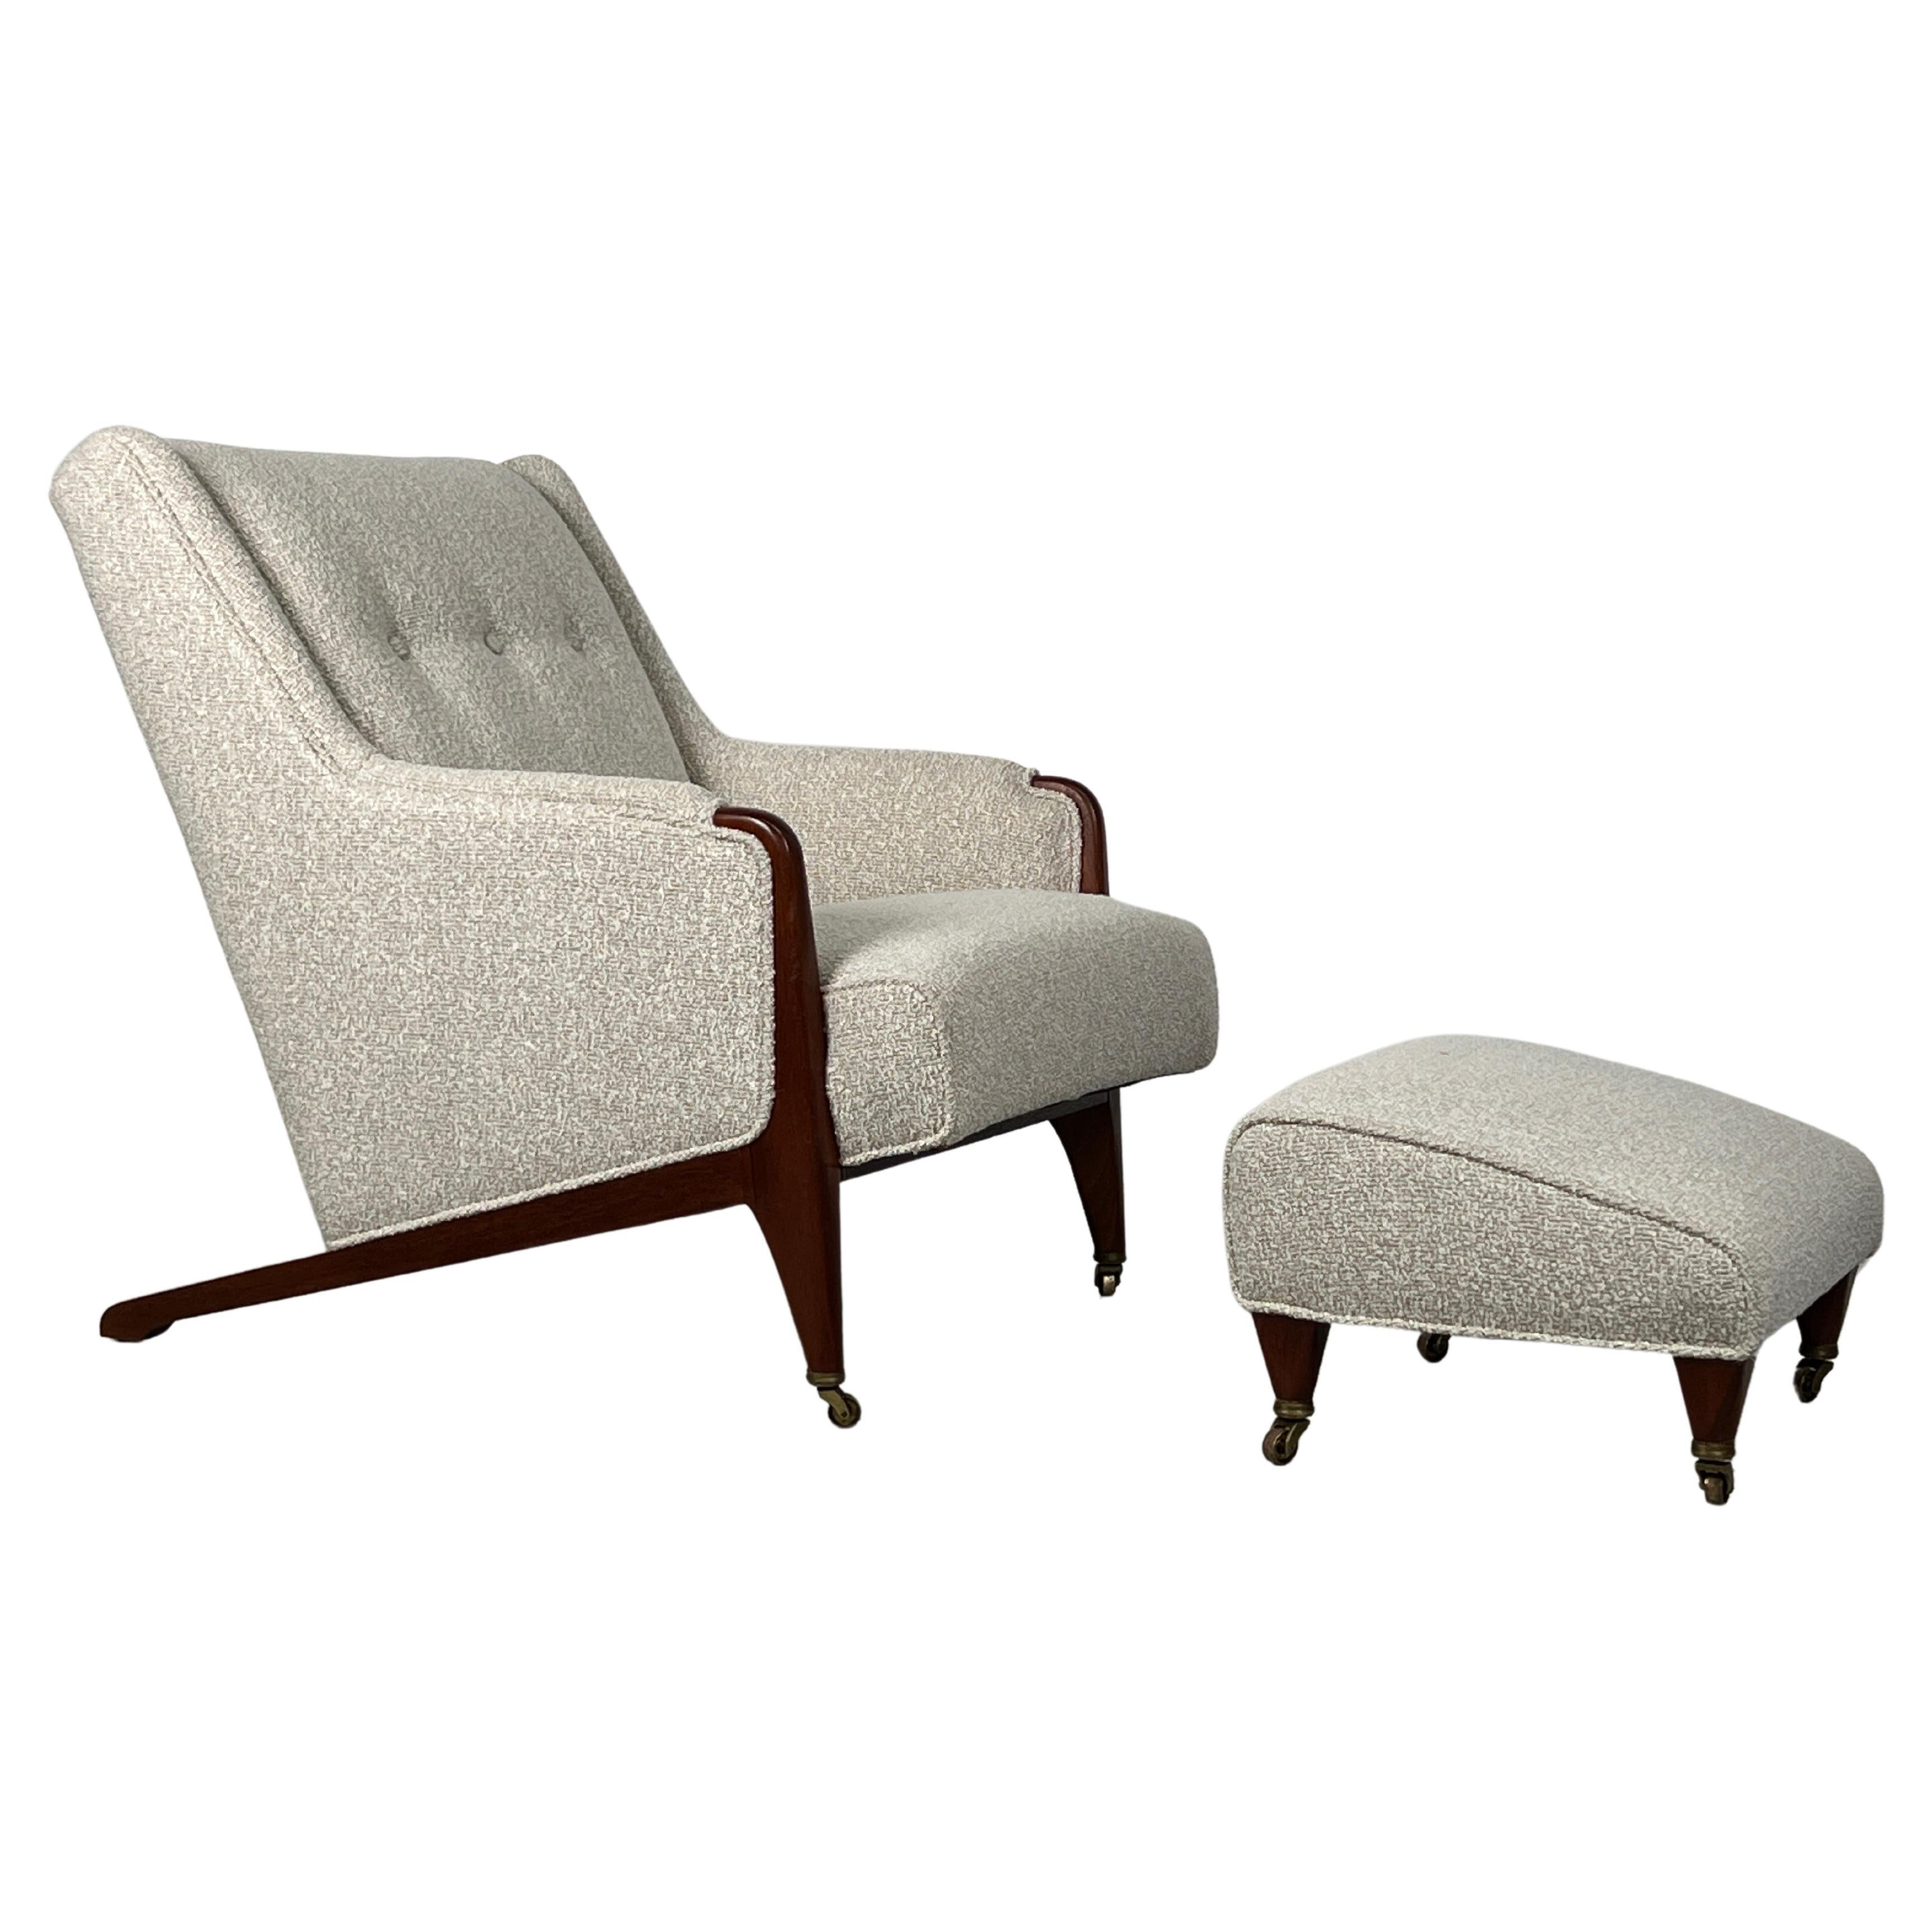 Lounge Chair and Ottoman by Edward Wormley for Dunbar 